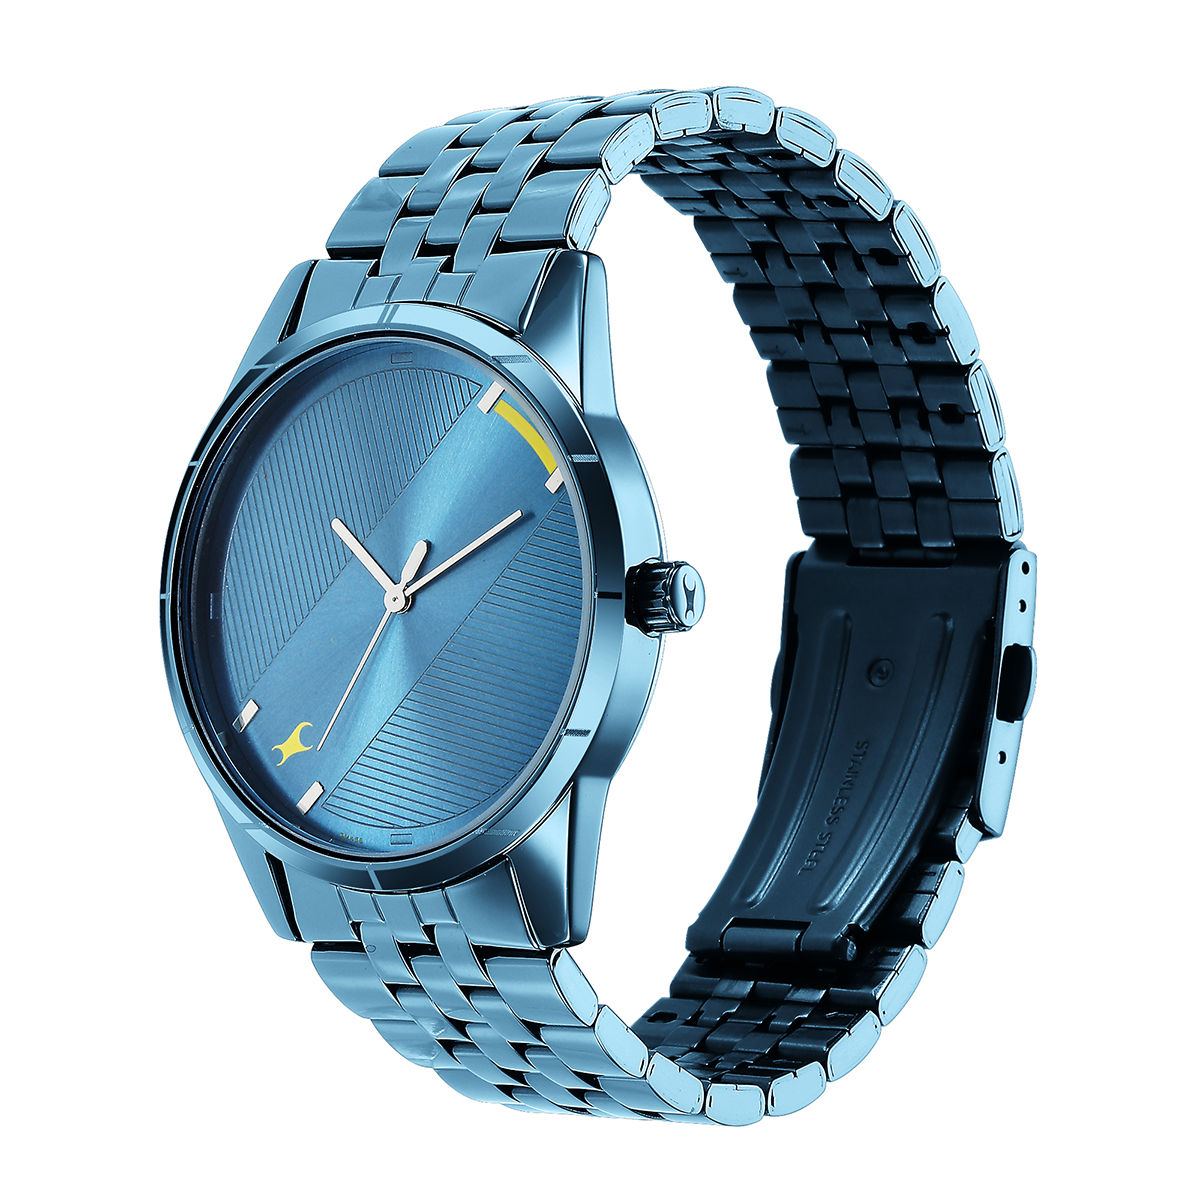 Buy Fastrack Stunners 3.0 3277QM01 Blue Dial Analog Watch for Men Online